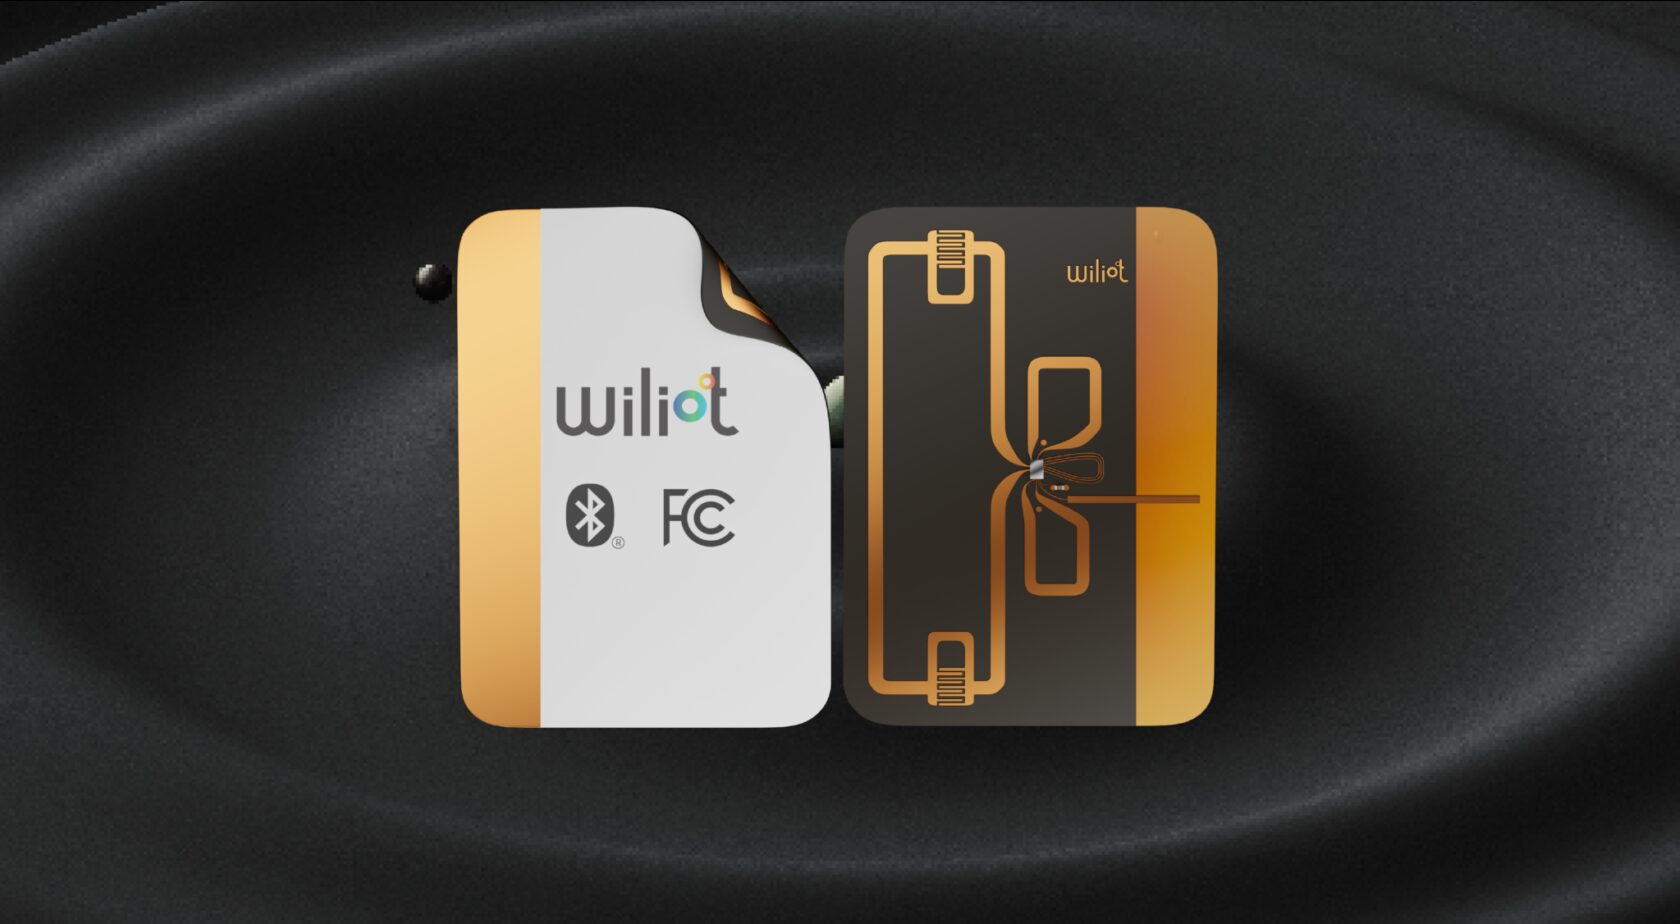 Wiliot to Debut Real-Time Humidity Sensing for its Revolutionary Ambient IoT Visibility Platform at Groceryshop 2023